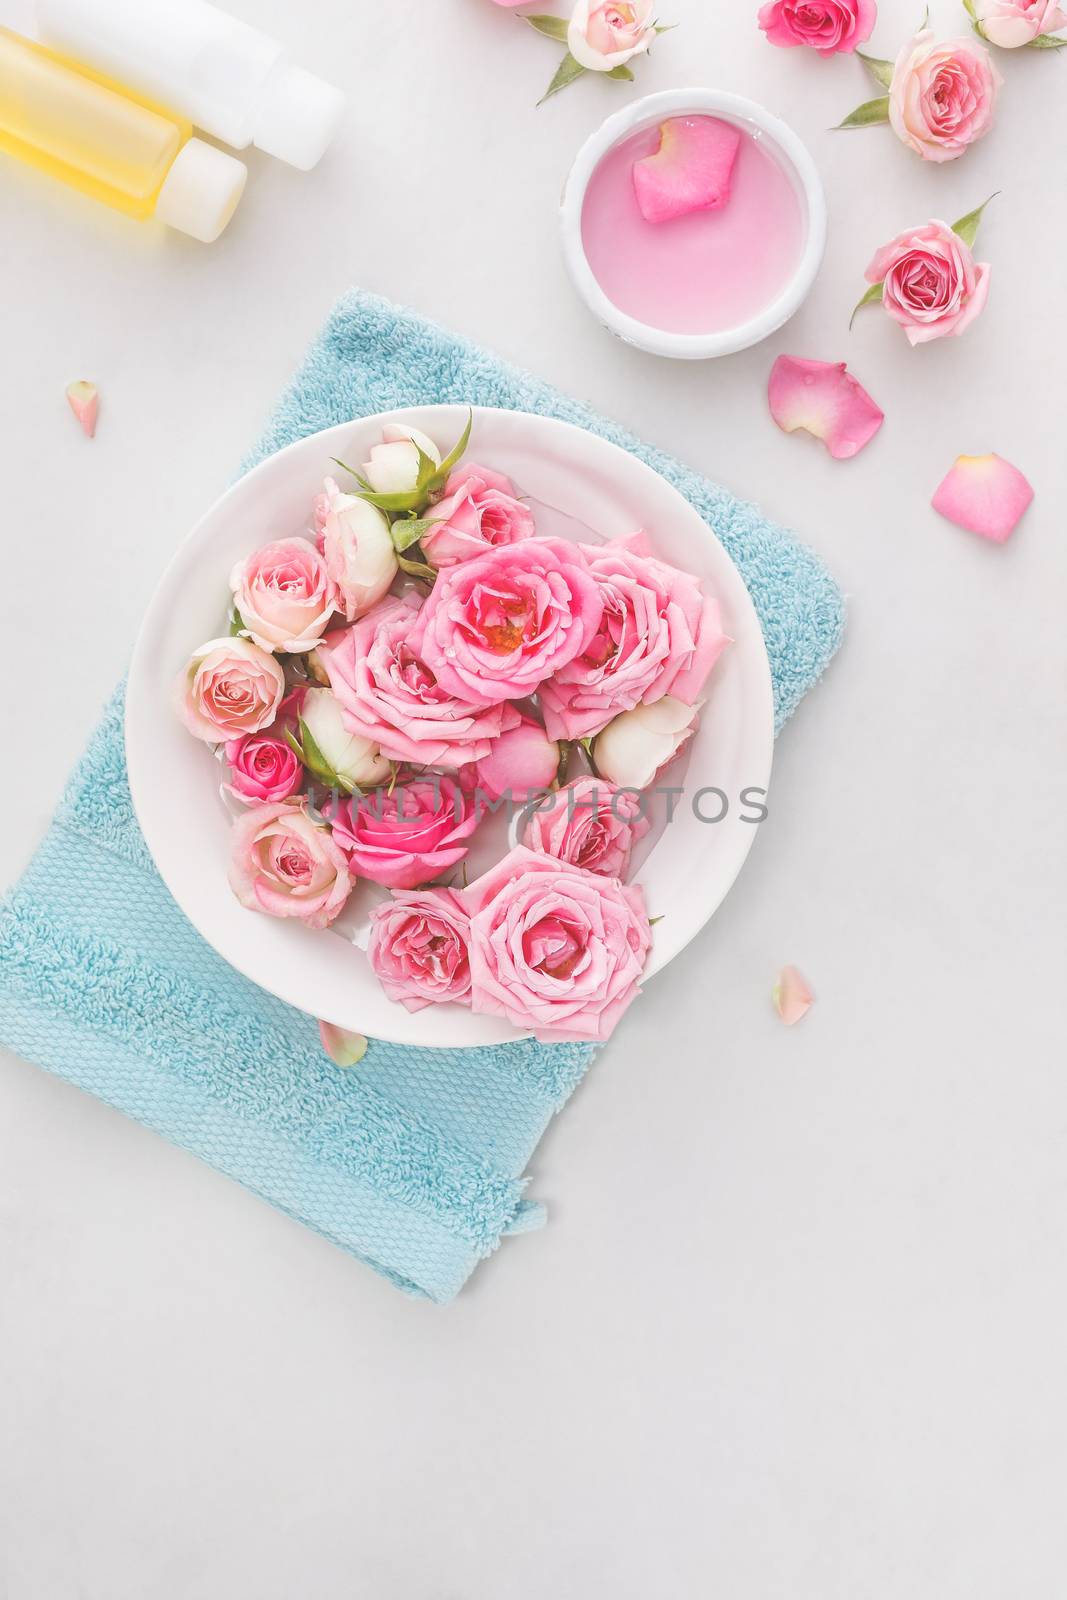 Fresh roses and rose petals in a bowl of water and various items used in spa treatments